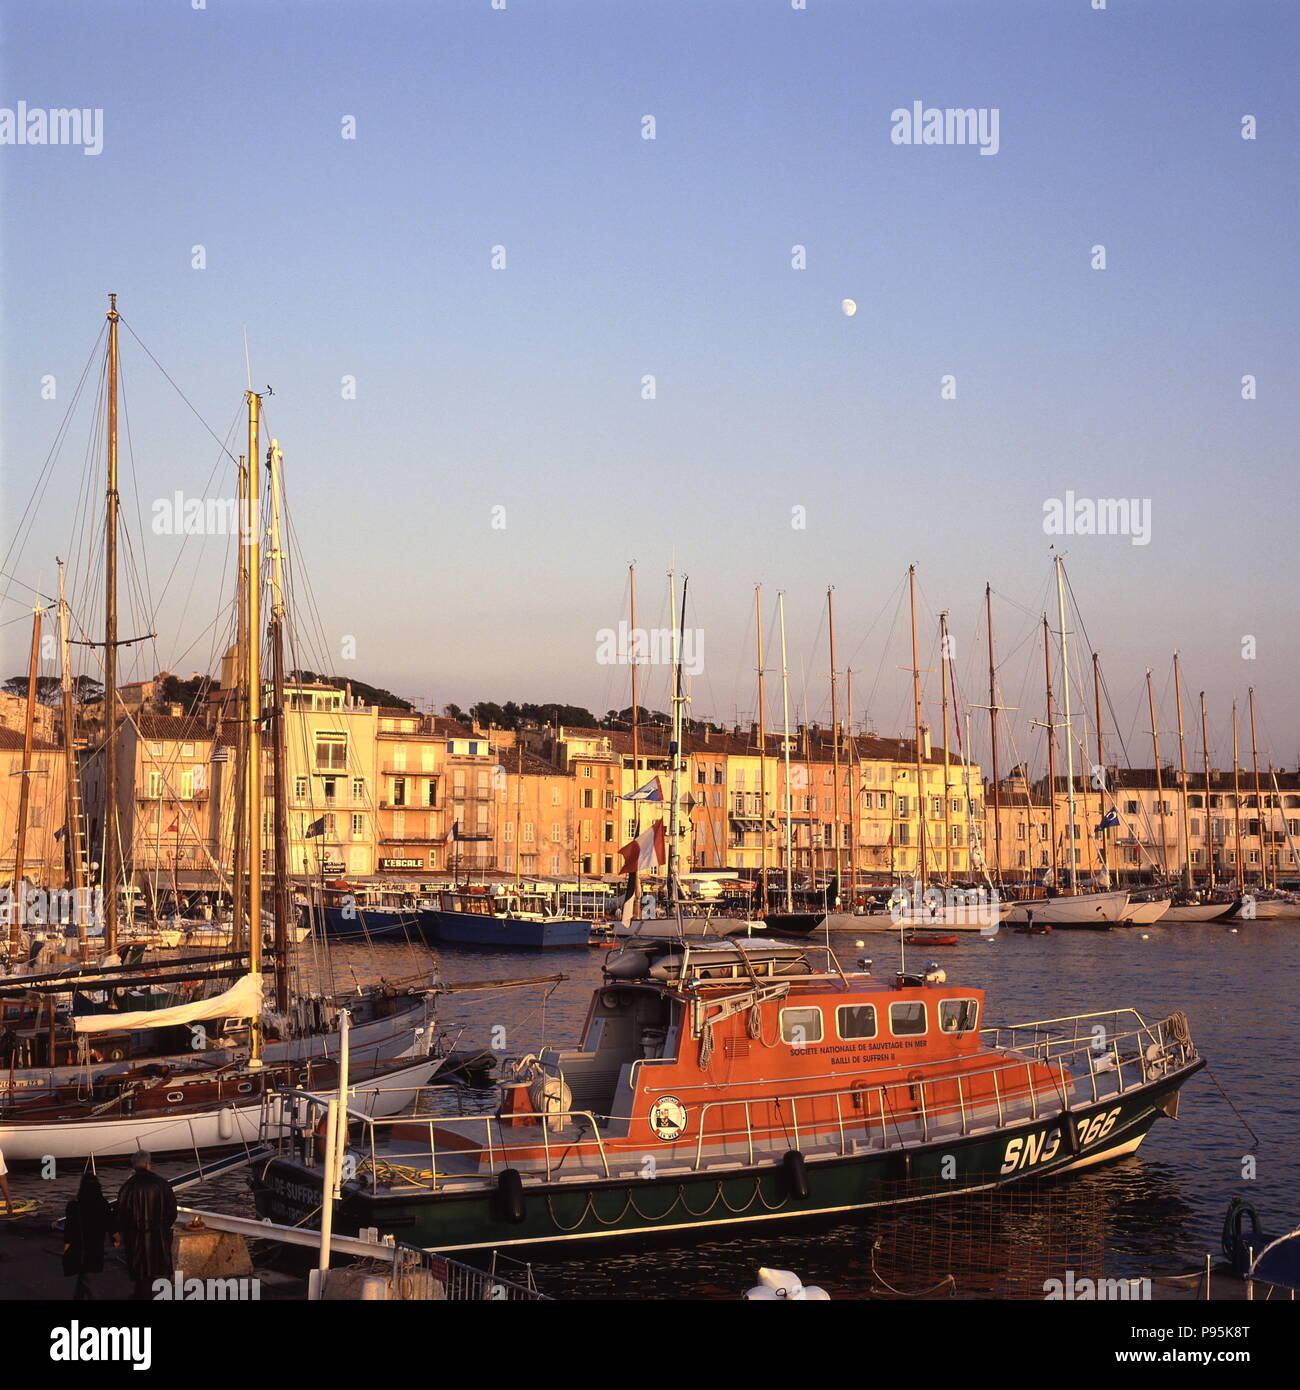 AJAXNETPHOTO. ST.TROPEZ, FRANCE. - PLAYGROUND OF THE RICH - MOON RISES OVER THE COTE D'AZUR HARBOUR ON THE MEDITERRANEAN. SOCIETE NATIONALE DE SAUVETAGE EN MER LIFEBOAT BAILLI DE SUFFREN II IS IN THE LEFT FOREGROUND. PHOTO:JONATHAN EASTLAND/AJAX REF:921904 15 Stock Photo